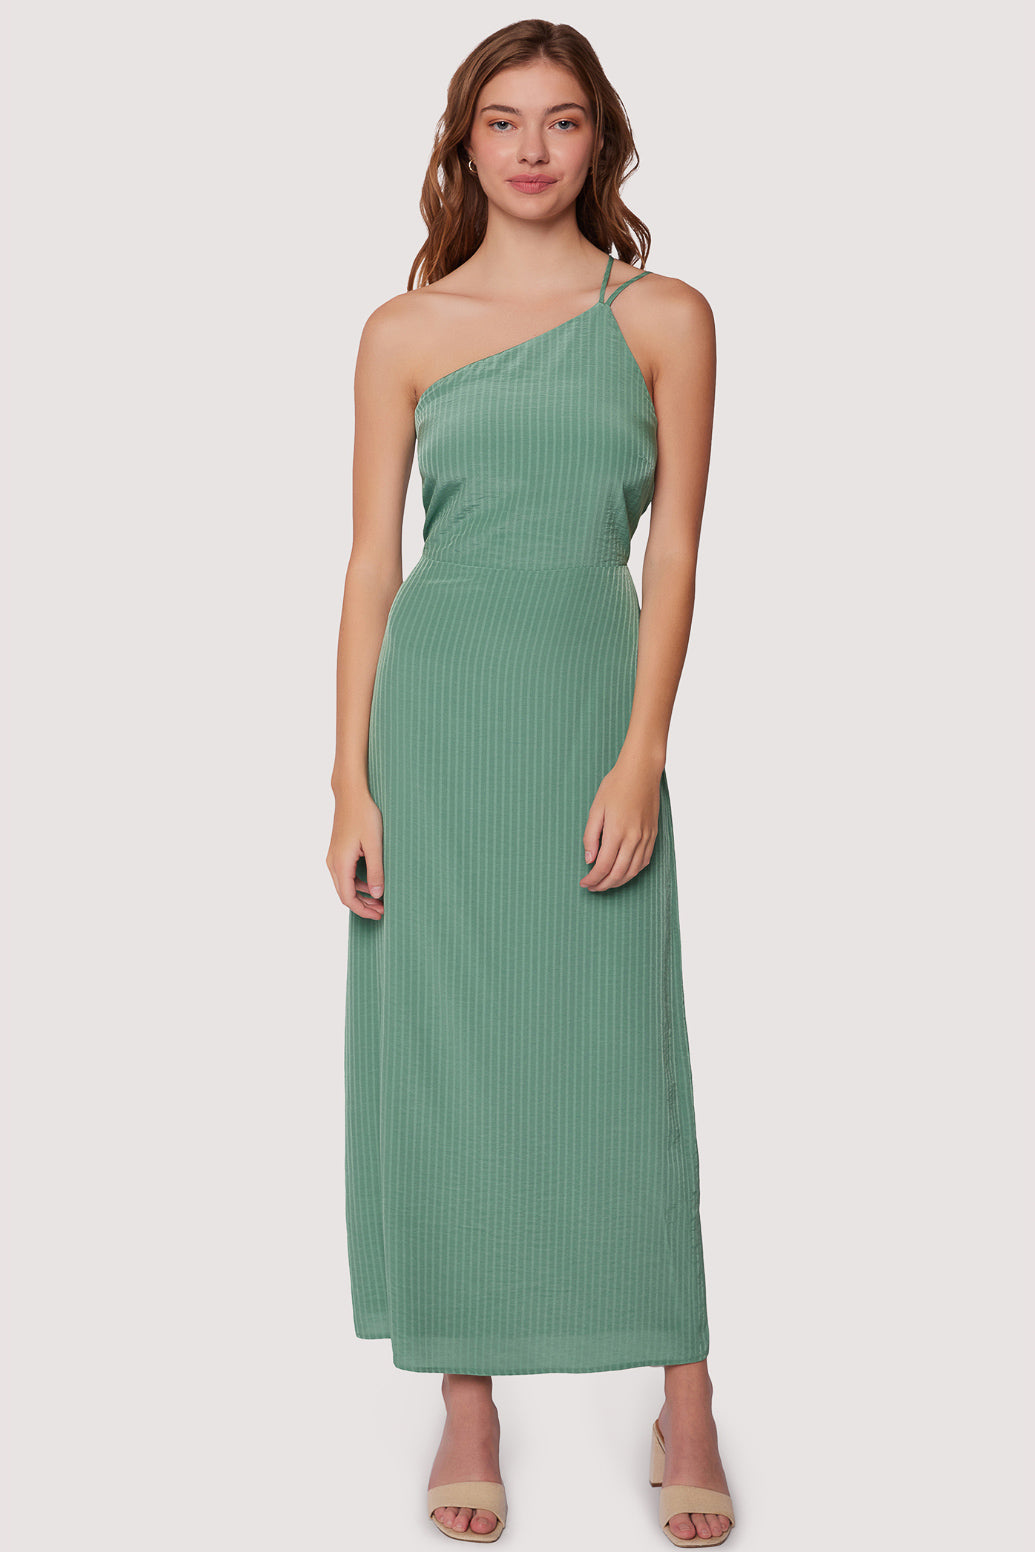 Willow in the Wind Maxi Dress